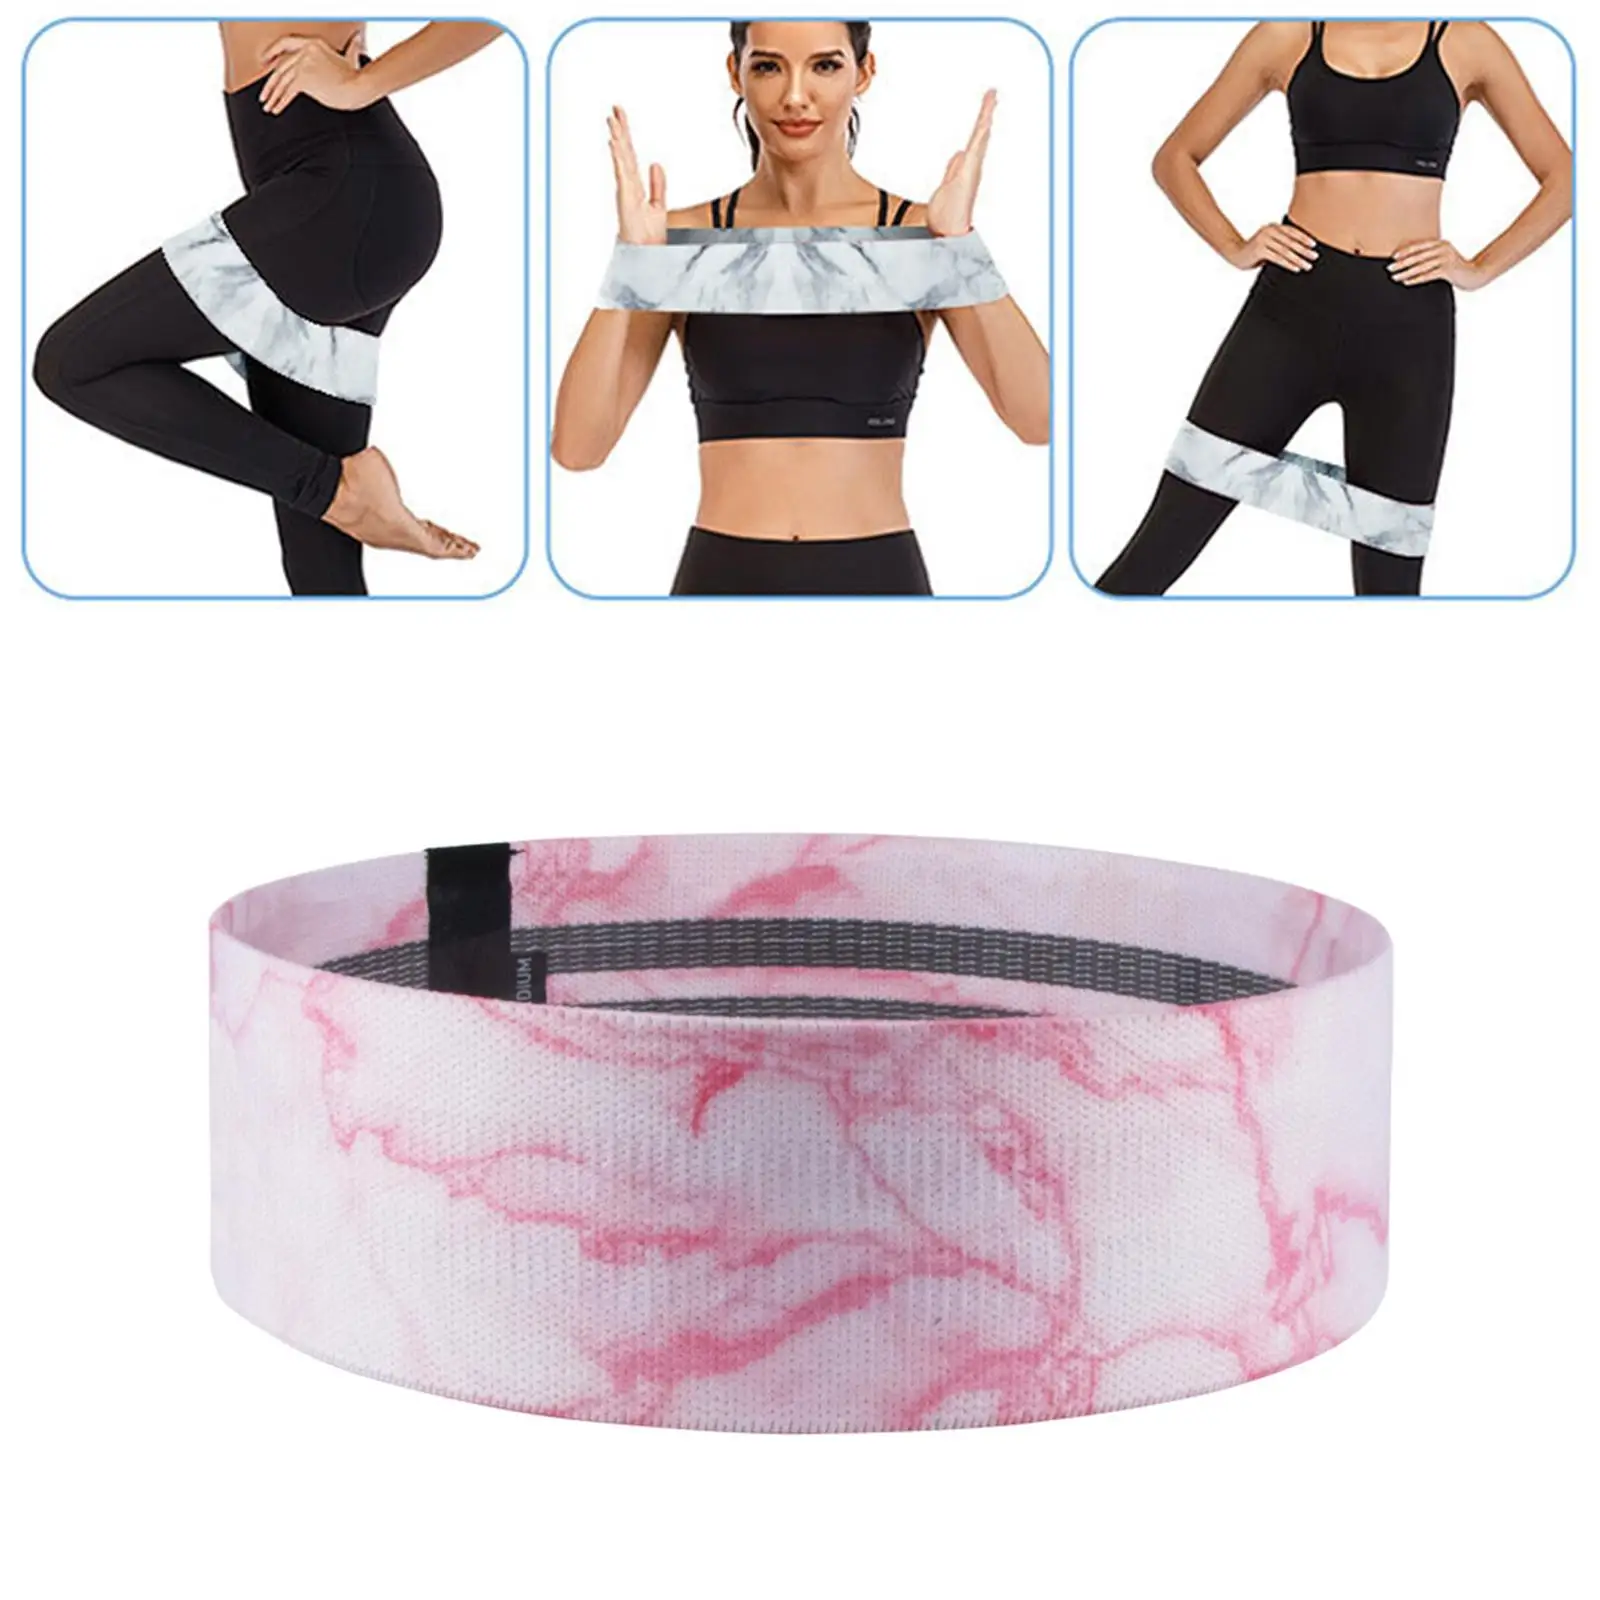 Resistance Bands Exercise Bands Non Slip Squat Bands Hip Circle Expander for Legs and Butt Glute Pilates Home Gym Women Men